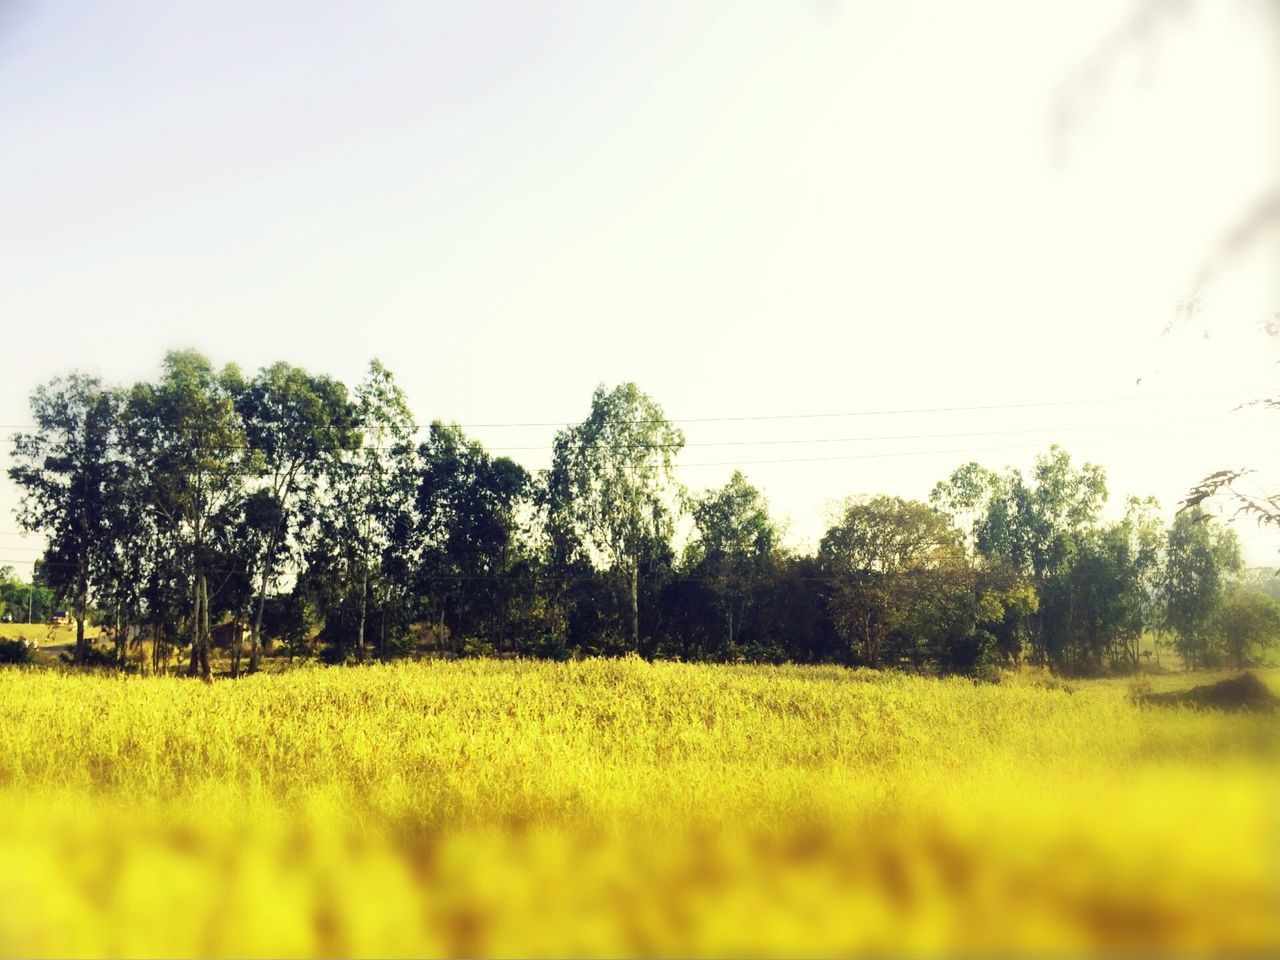 tree, field, growth, tranquil scene, tranquility, clear sky, landscape, grass, beauty in nature, nature, scenics, rural scene, green color, sky, copy space, grassy, day, agriculture, plant, outdoors